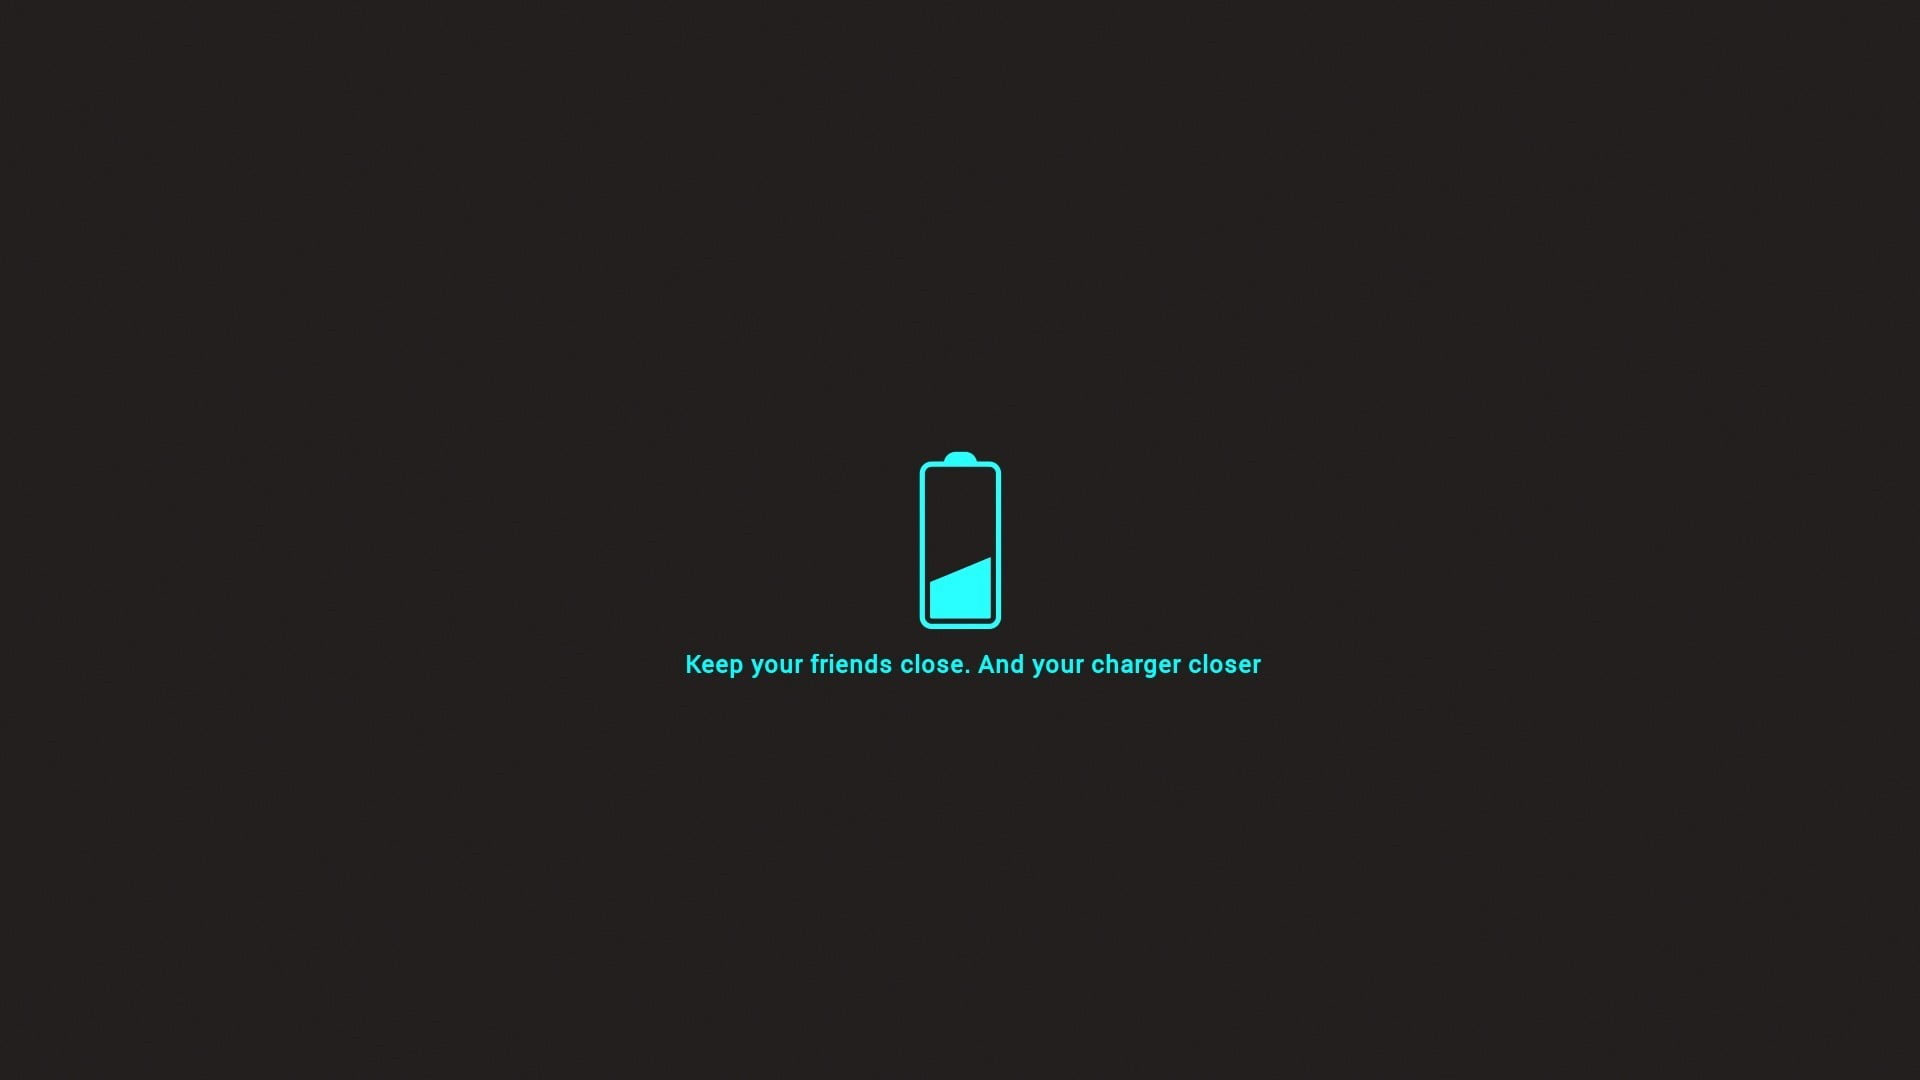 Battery logo, low battery, minimalism, quote, typography, simple